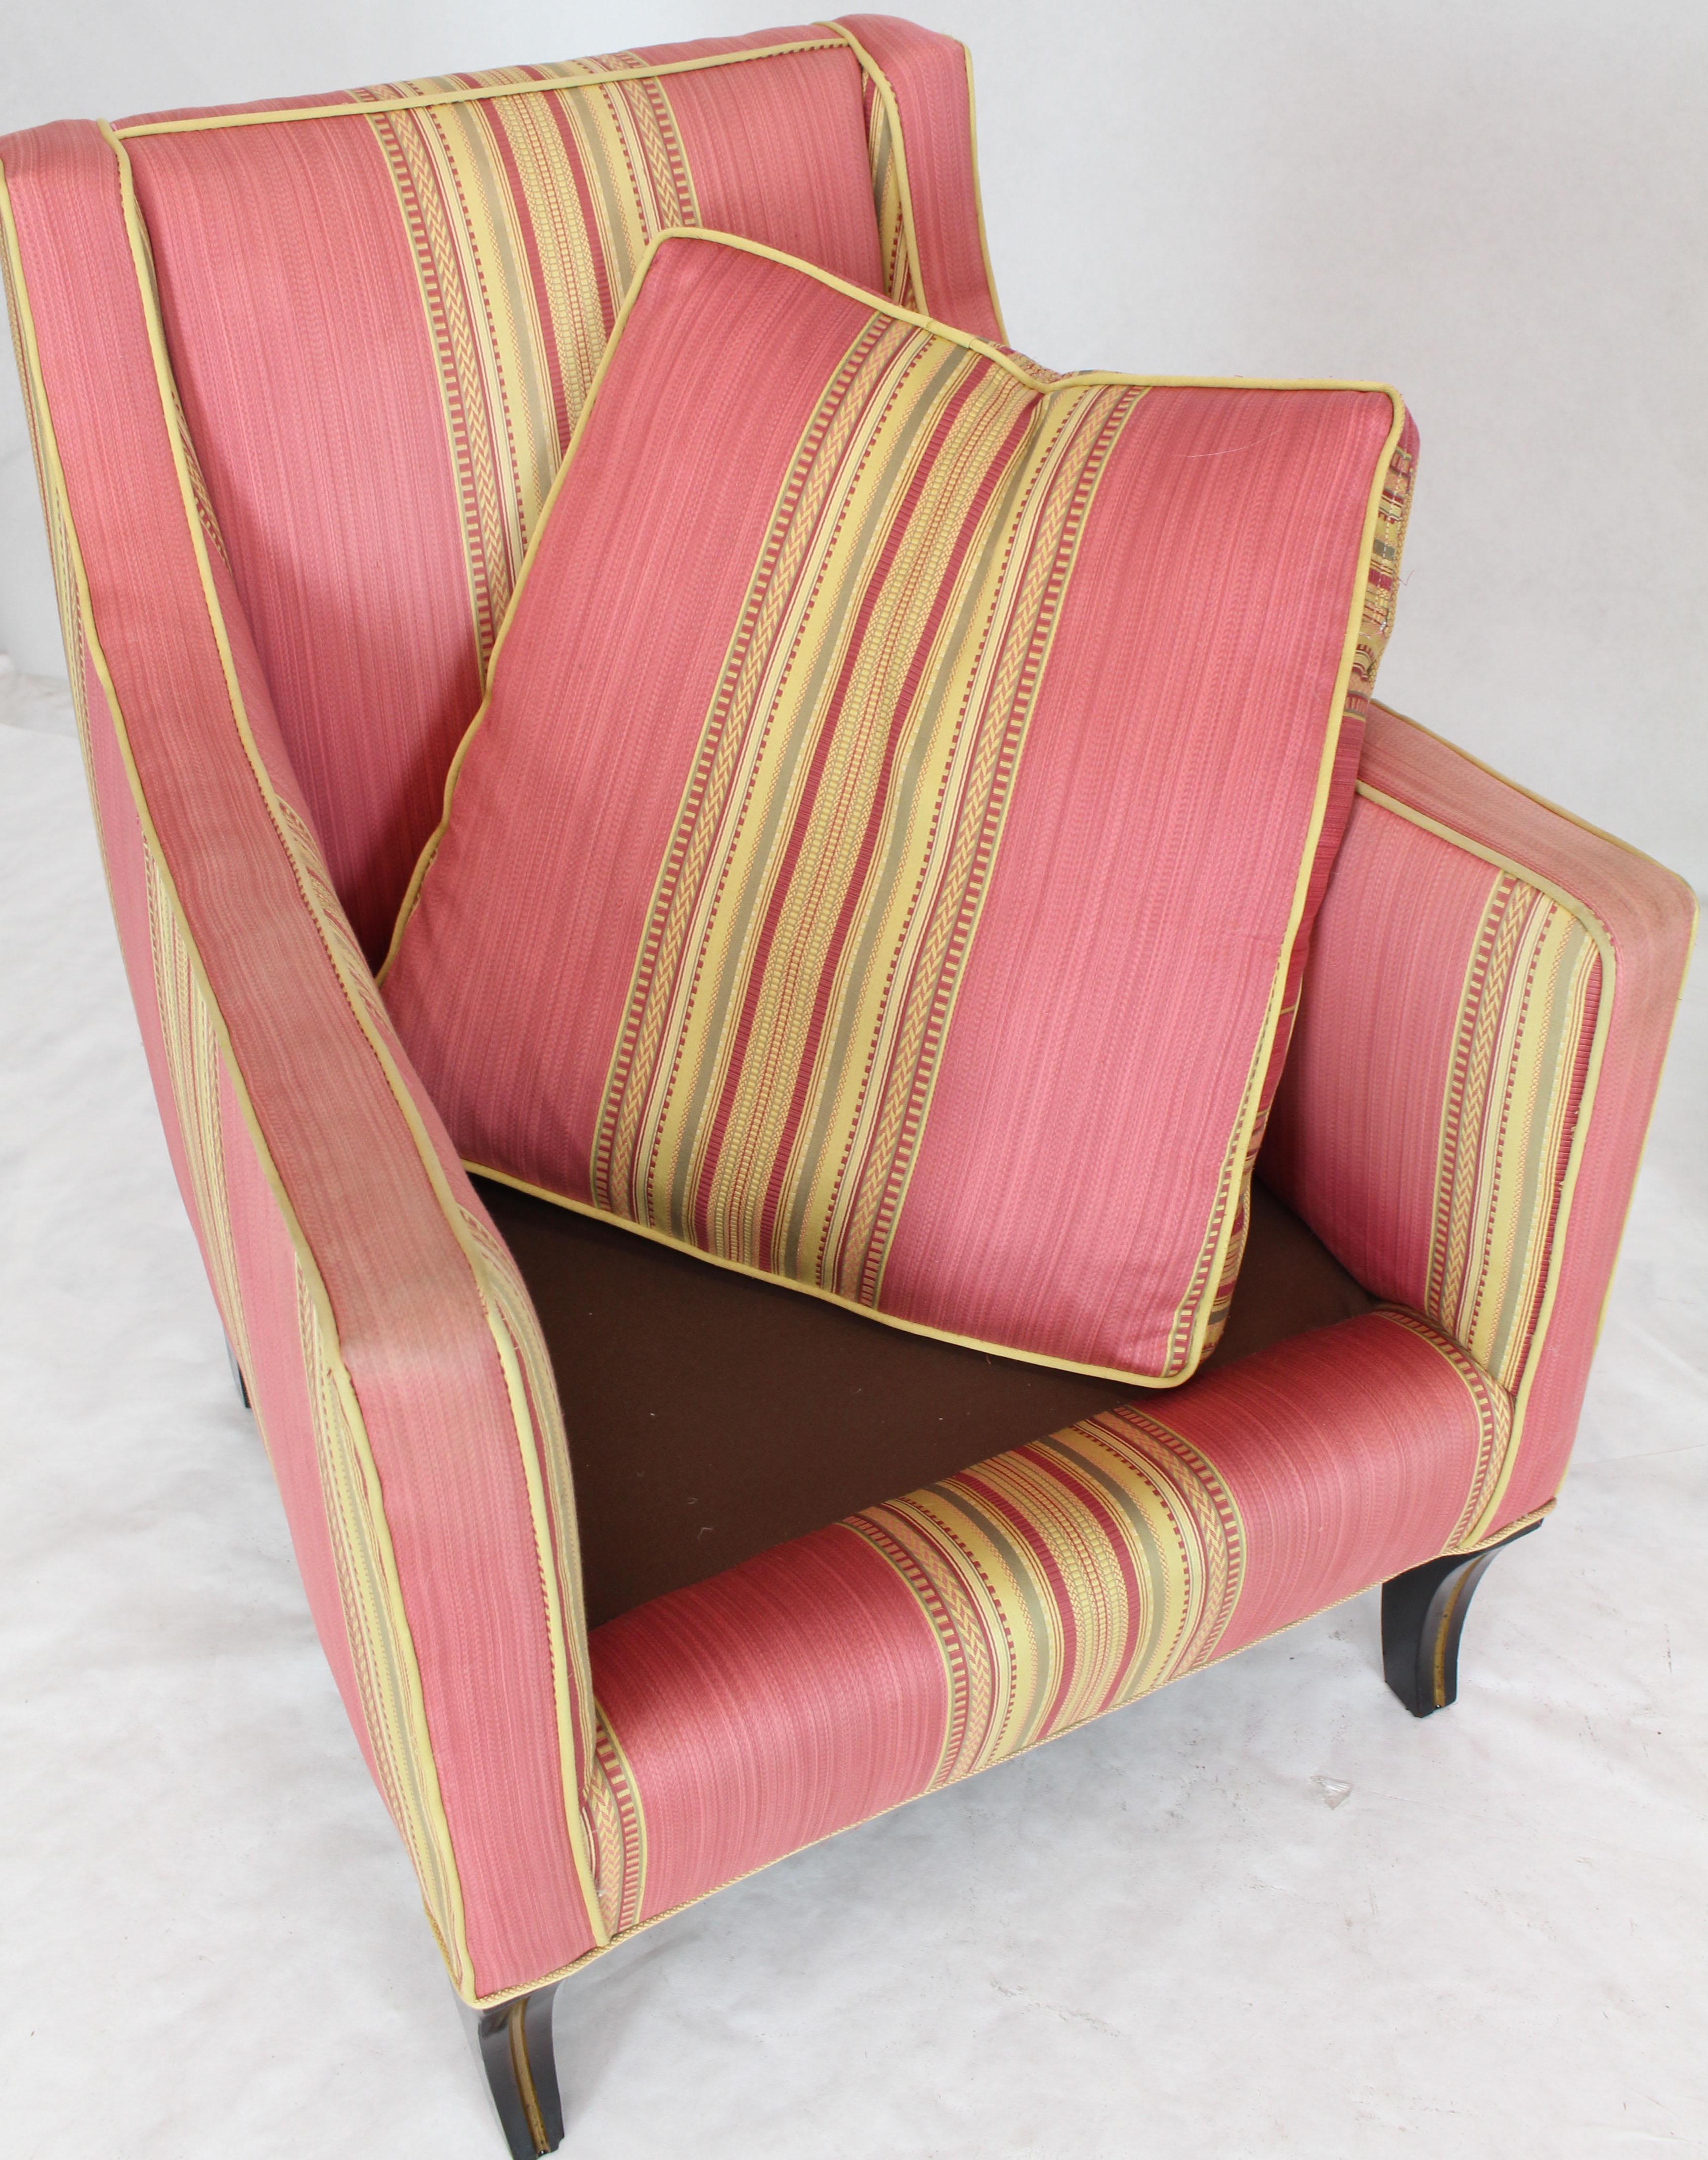 Pair of Deco or neoclassical armchairs in red and yellow silk. Sabre mahogany and gold legs. Study heavy frame construction. Down filled cushions offer very comfortable seating with great back support. Compact design.